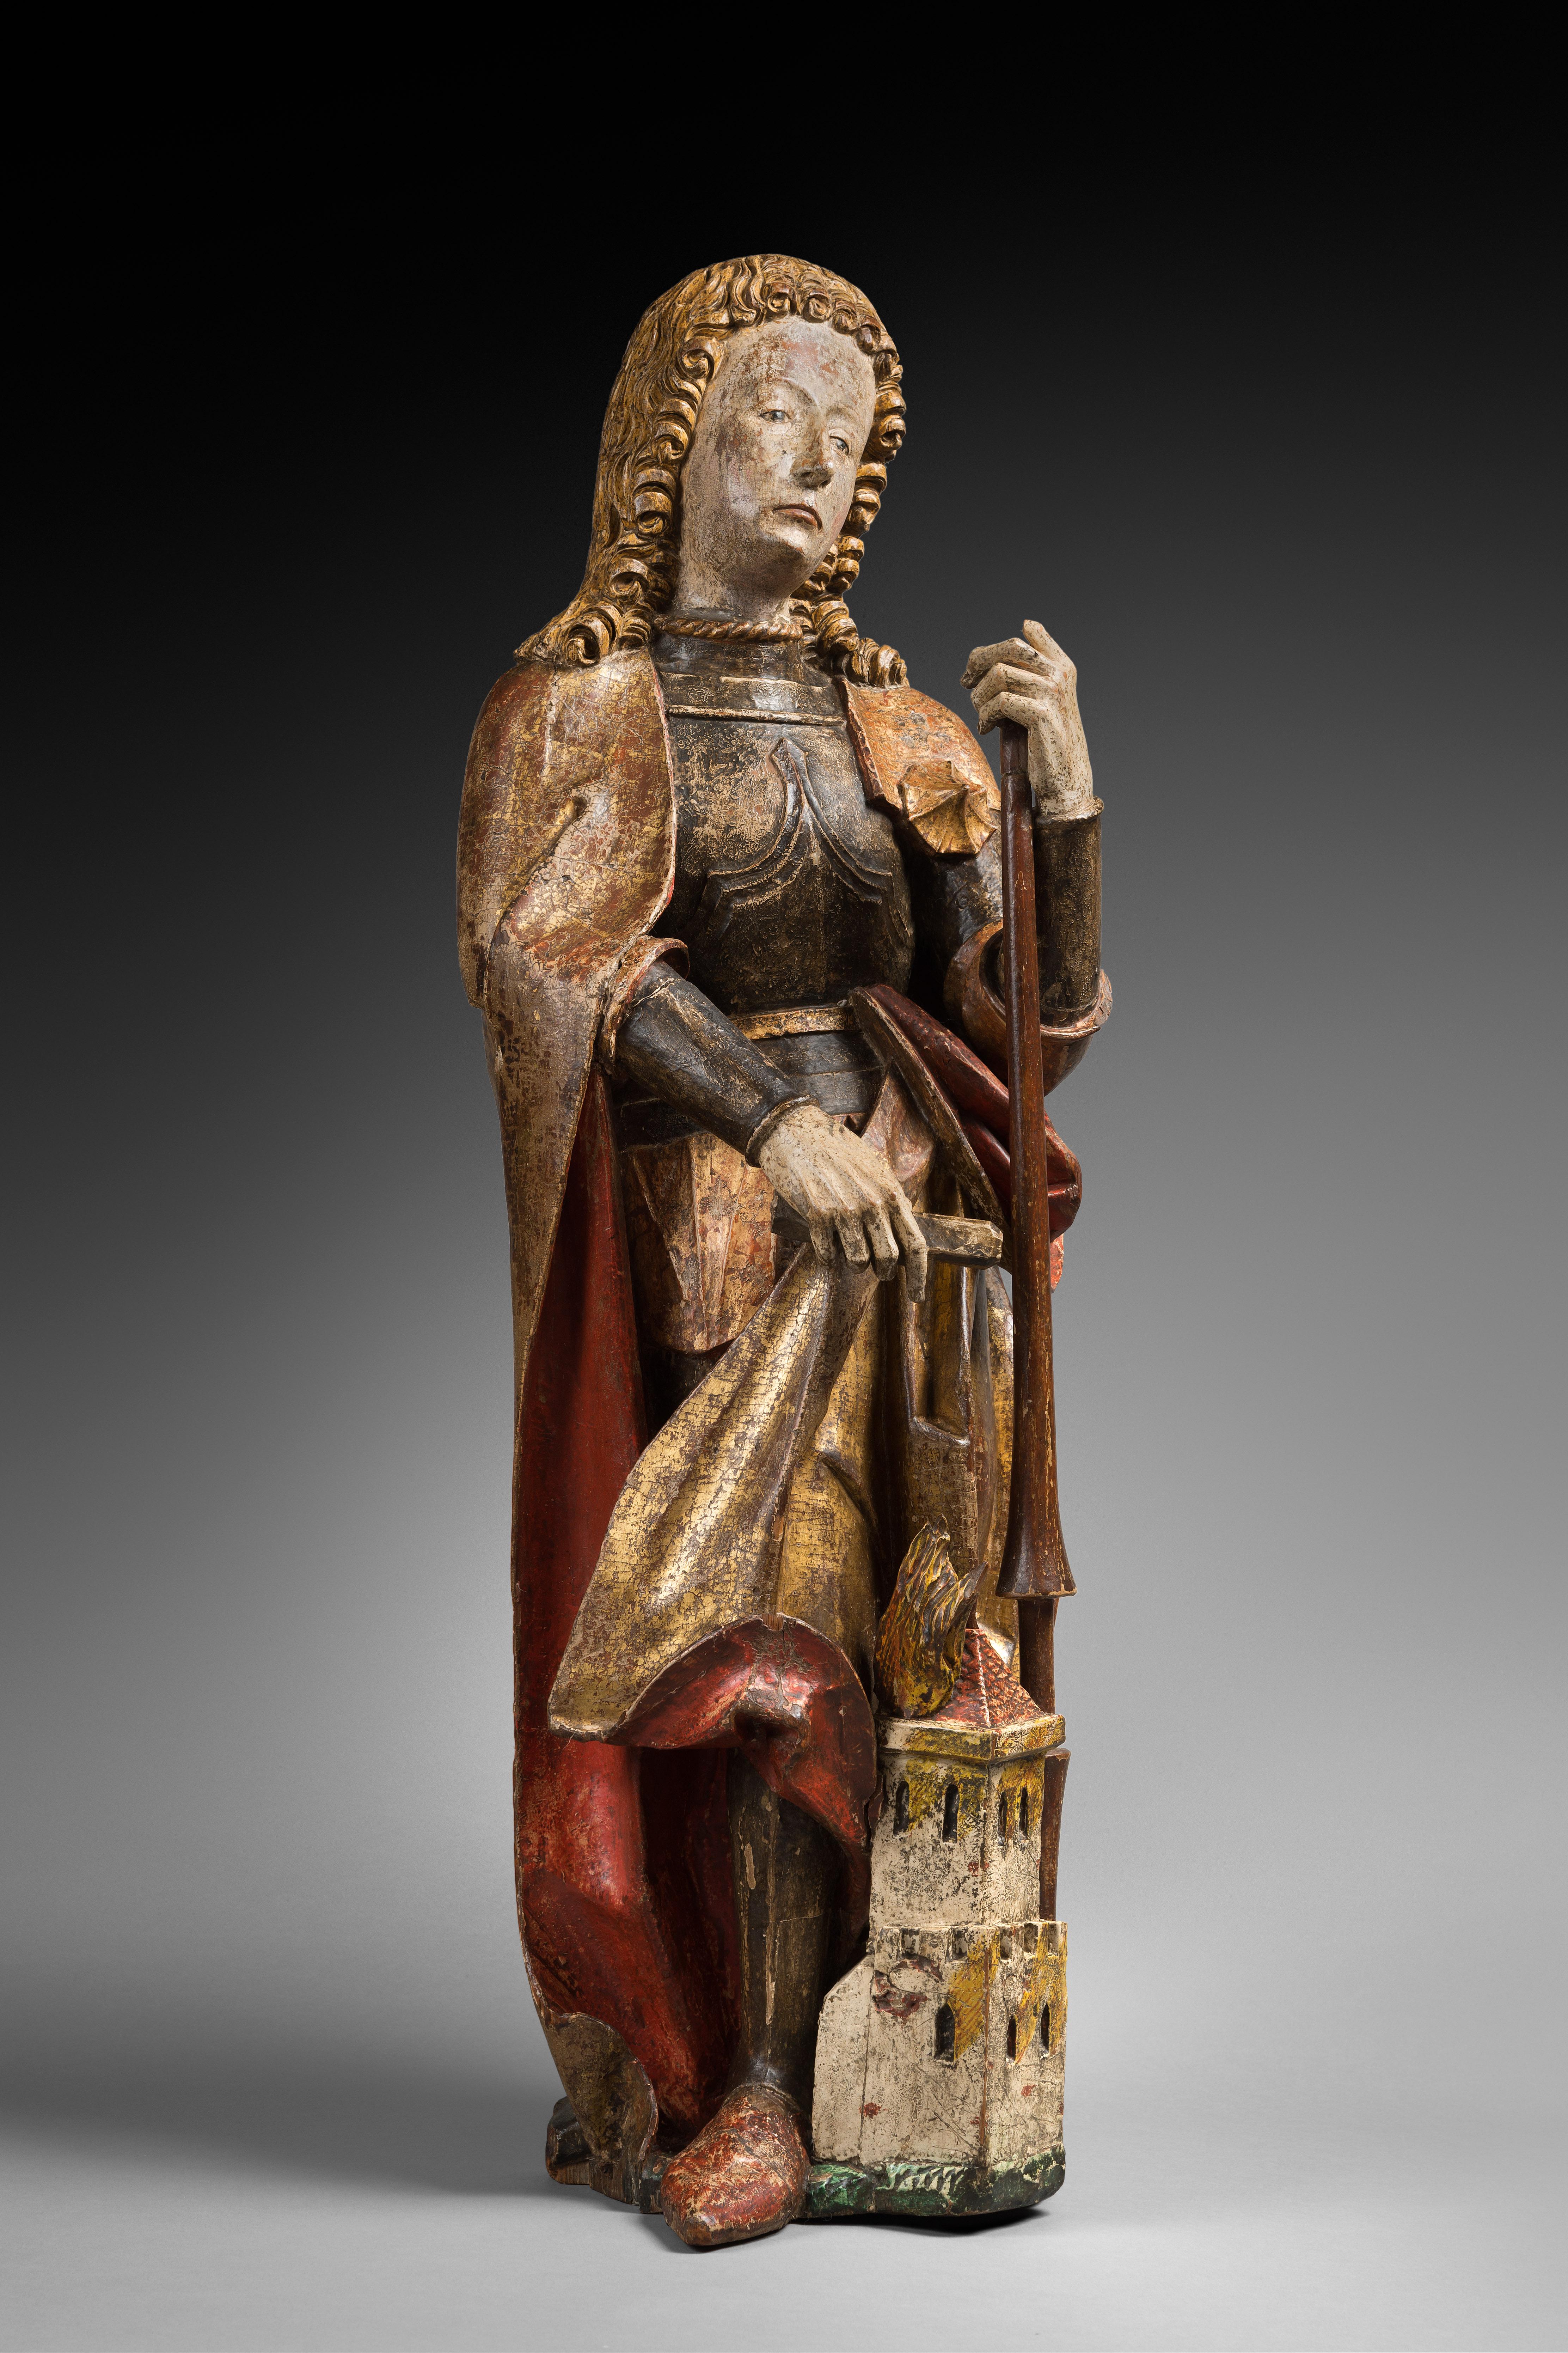 CARVED POLYCHROME WOOD DEPICTING SAINT FLORIAN

ORIGIN : SWABIA, SOUTHERN GERMANY
PERIOD : LATE 15th CENTURY

Height : 98 cm
Length : 29 cm
Depth : 24 cm

Polychrome limewood
Very fine condition

Provenance 
- Swiss collection STAEHELIN-PARAVICINI -